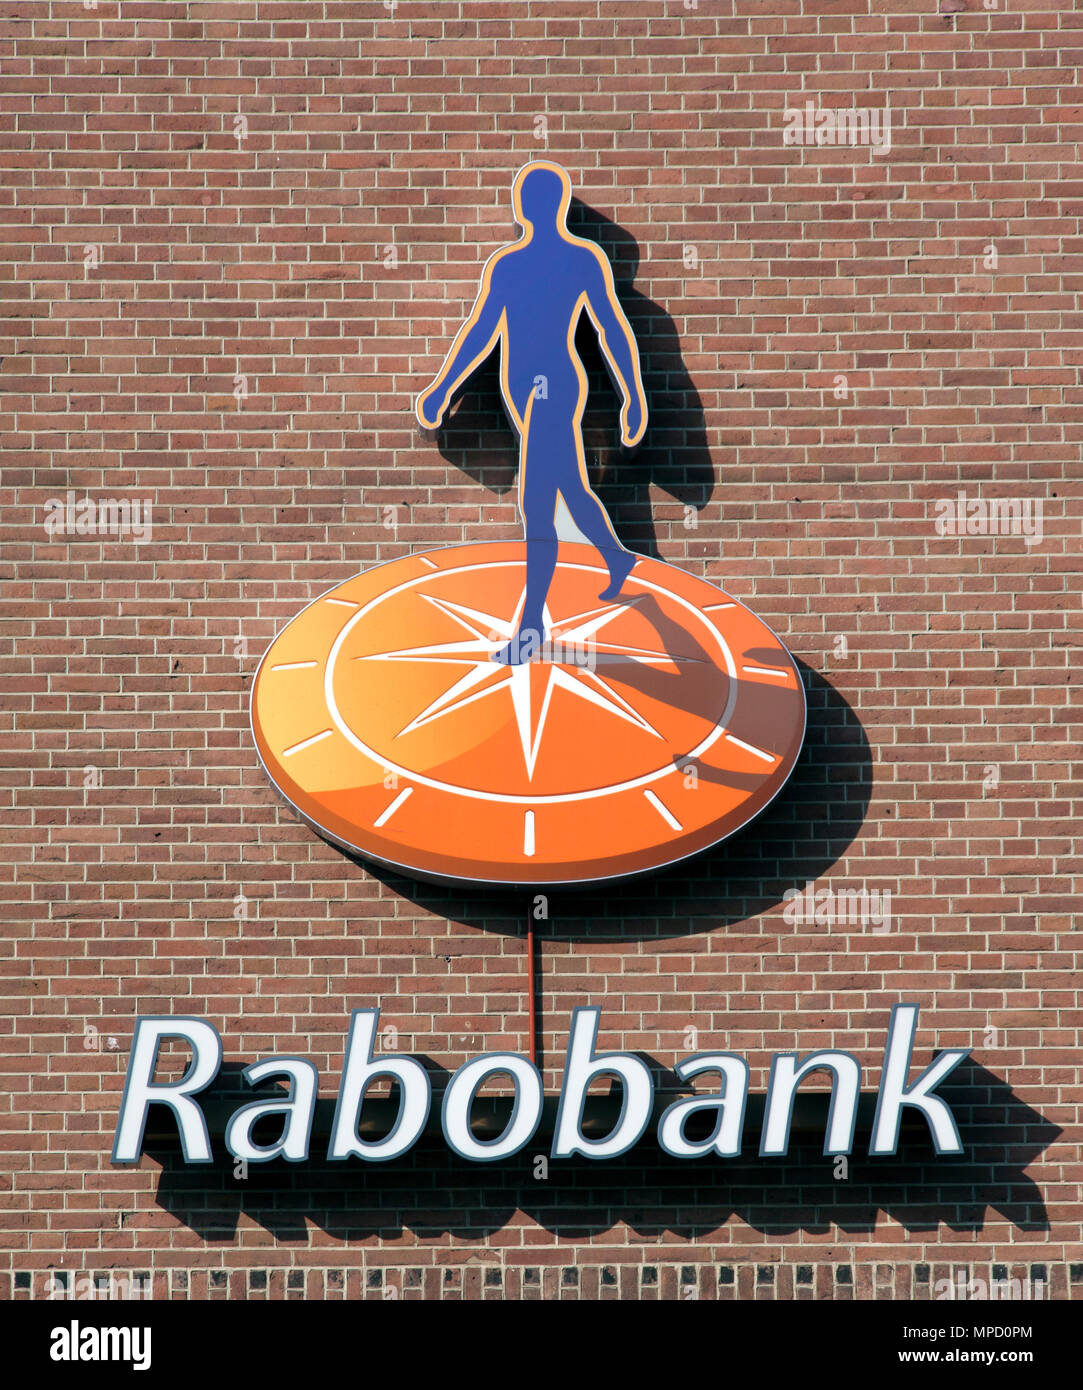 Amsterdam, Netherlands-october 10, 2015: Rabobank sign on a wall in Amsterdam Stock Photo